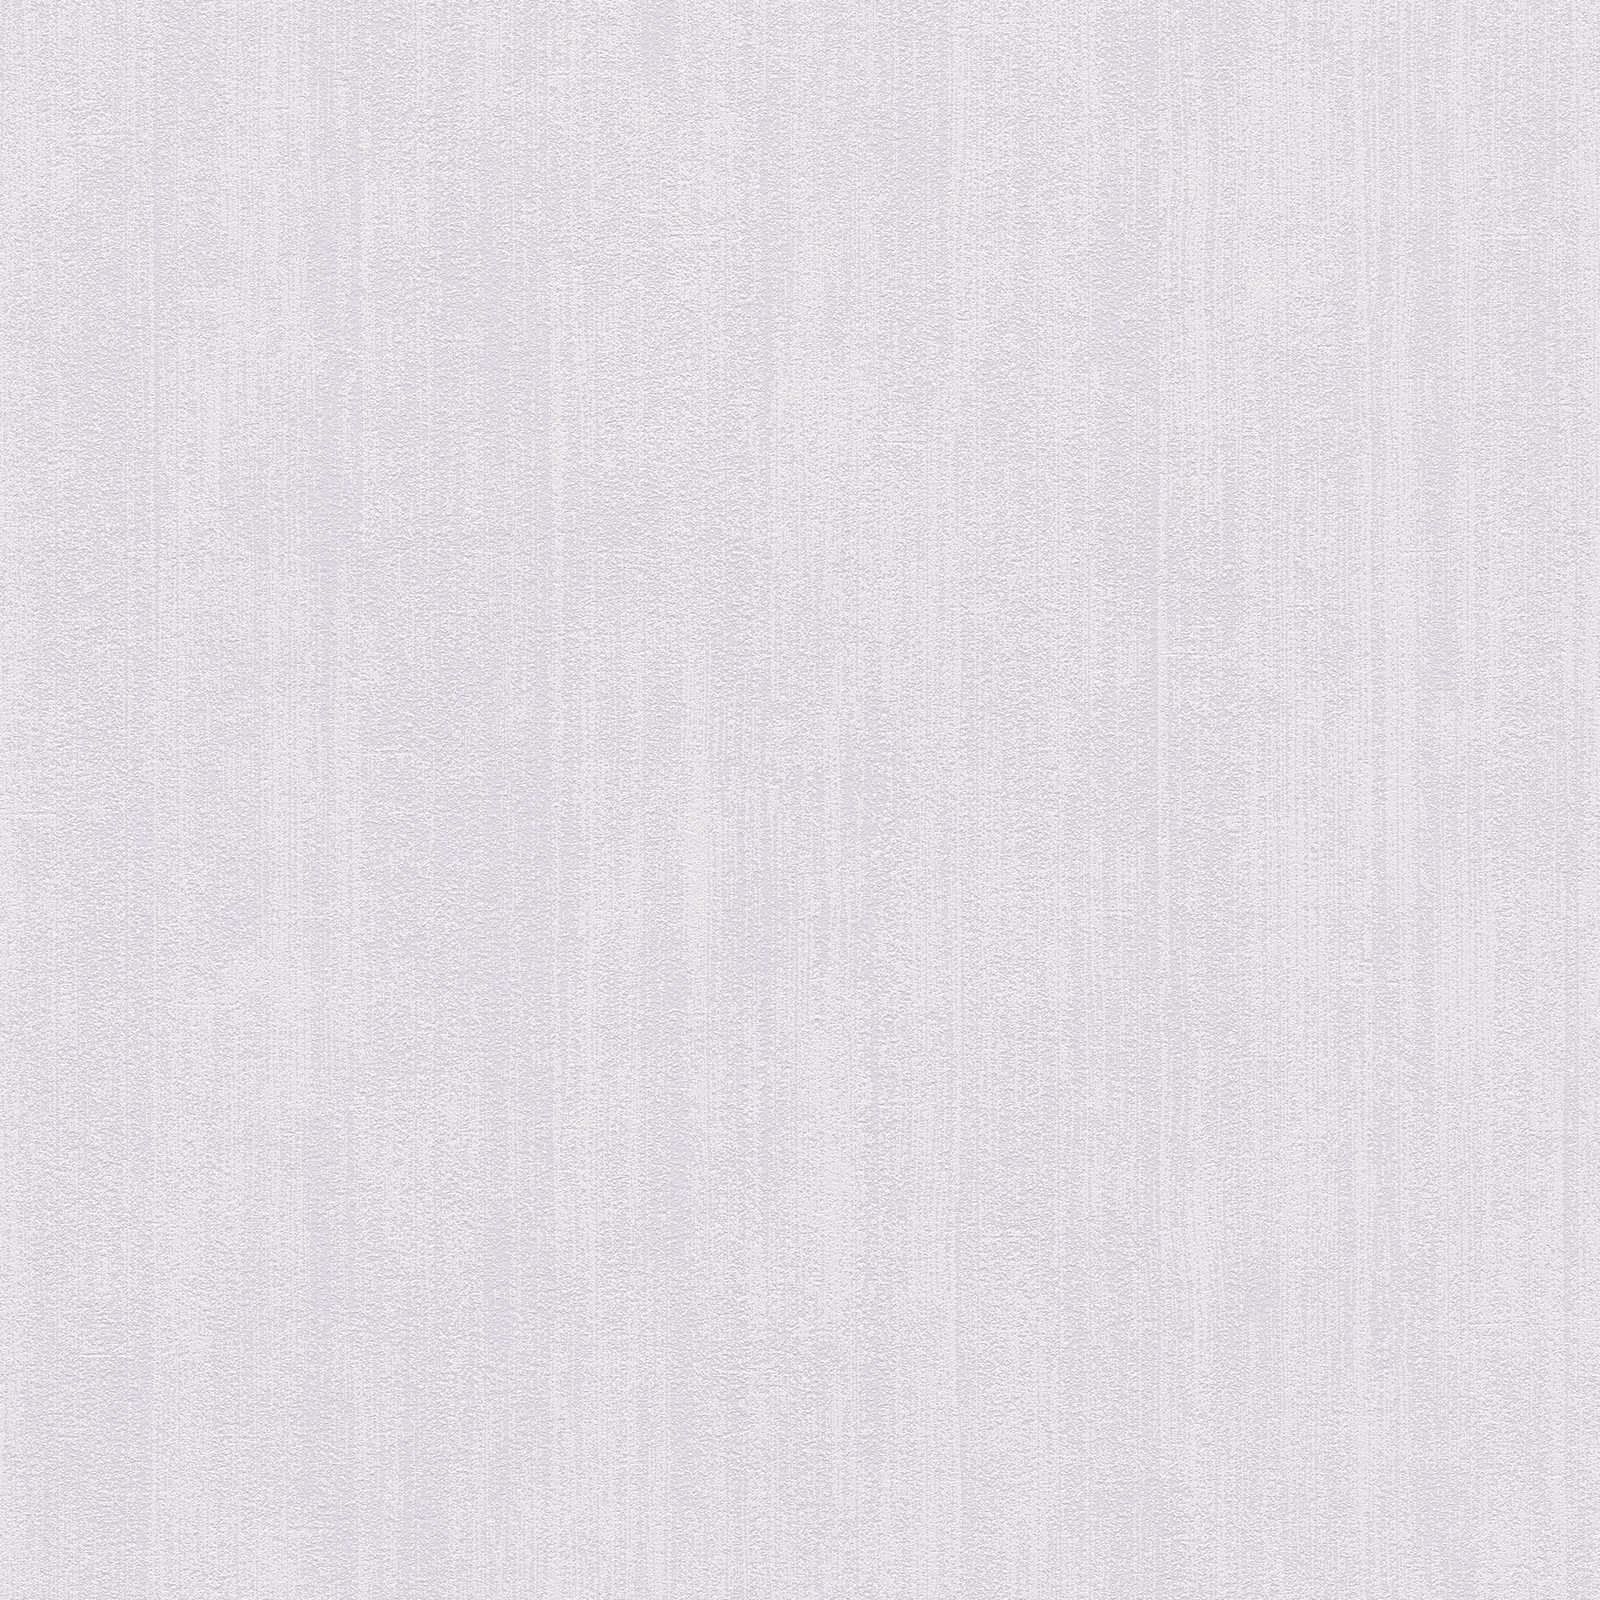 Plain non-woven wallpaper with tone-on-tone hatching - cream
